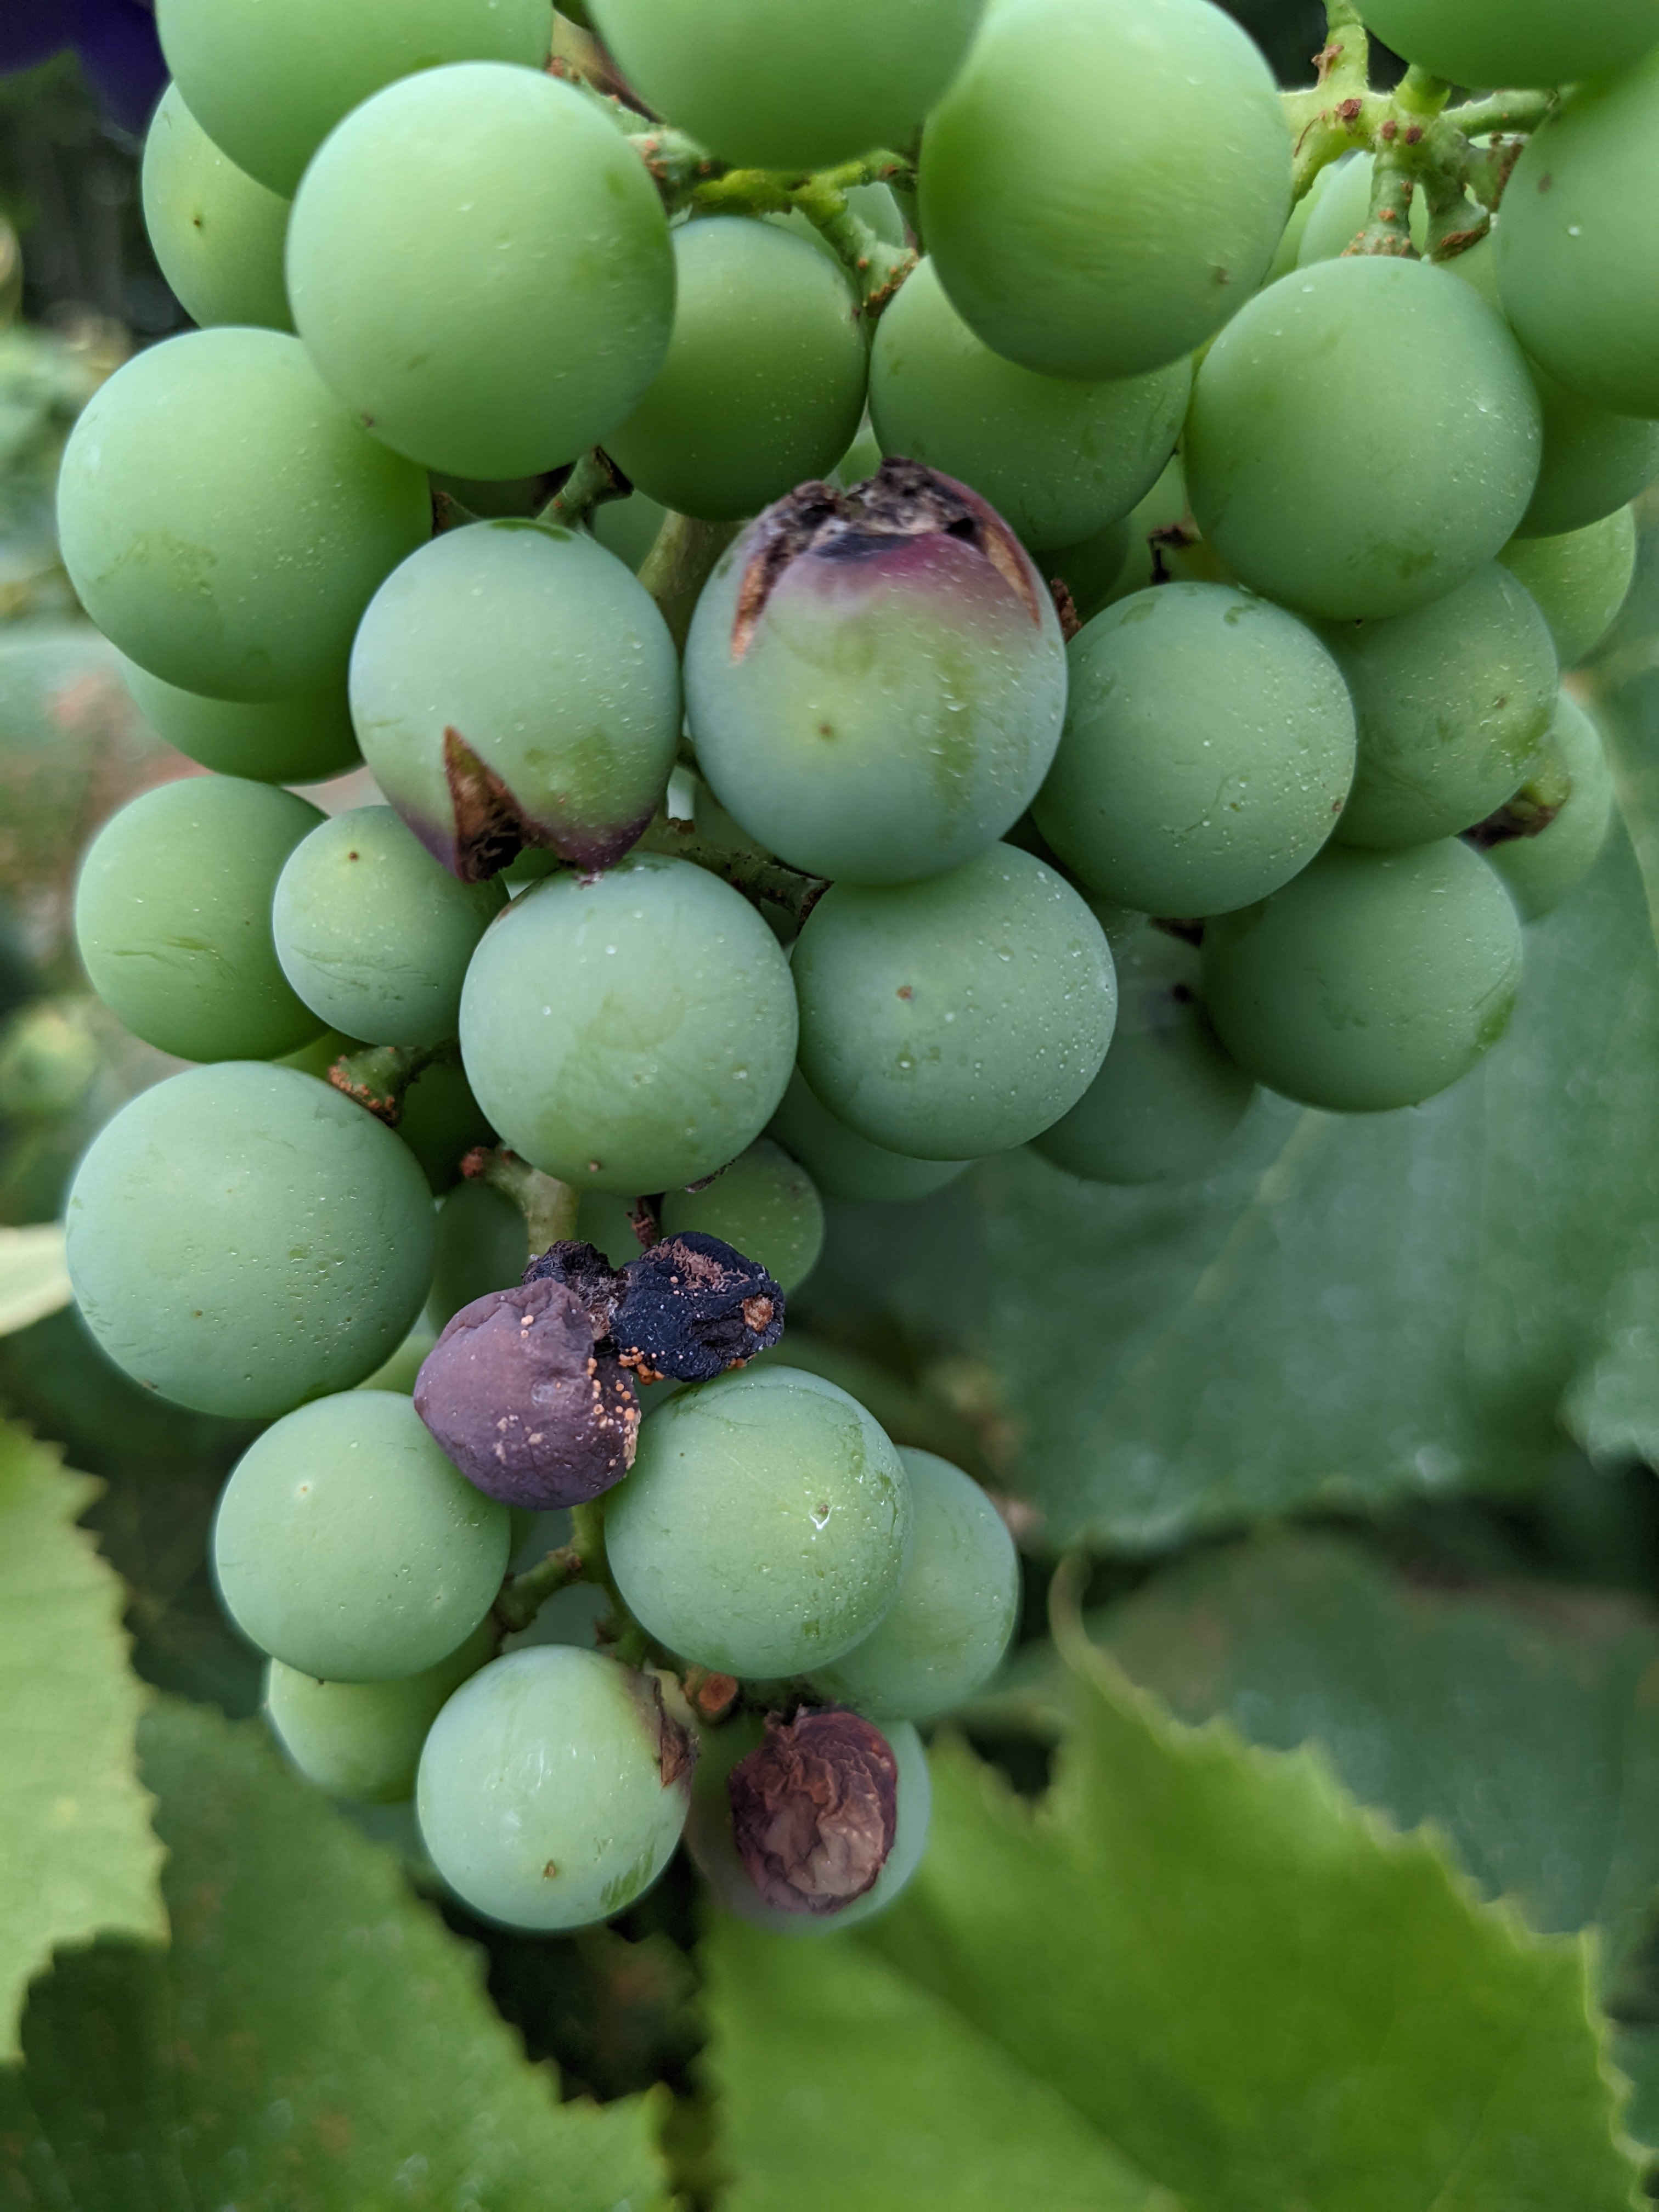 Damage to grapes.